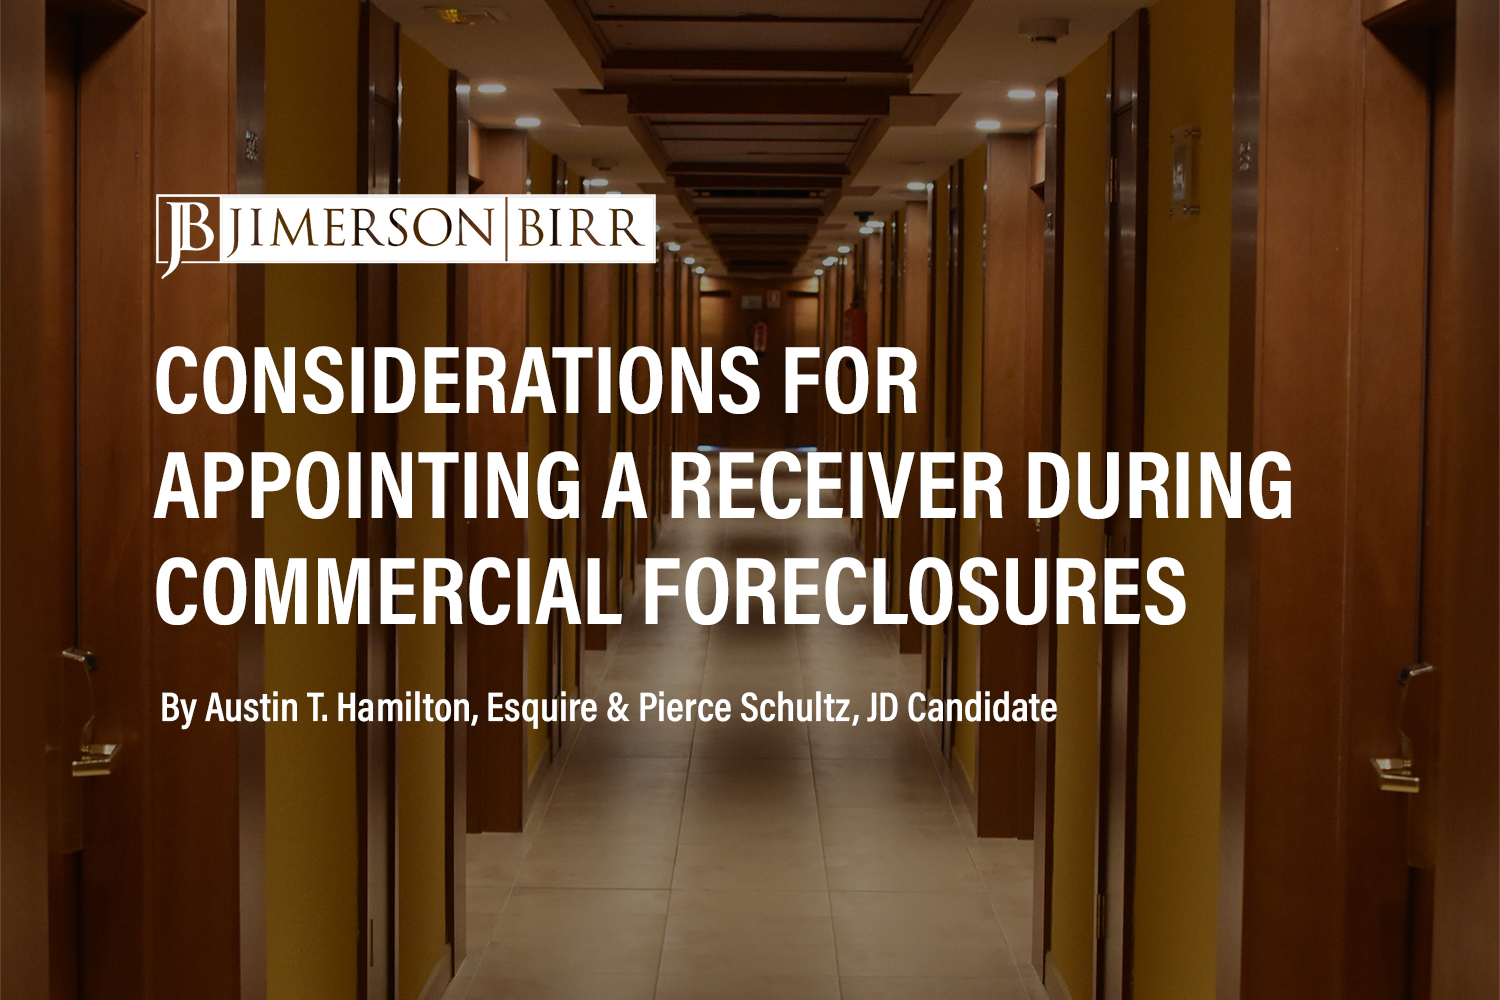 Mitigating Risks Associated with Hotel, Restaurant and Entertainment Industry Economic Challenges: Part 6 – Considerations for the Appointment of a Receiver During Commercial Foreclosures